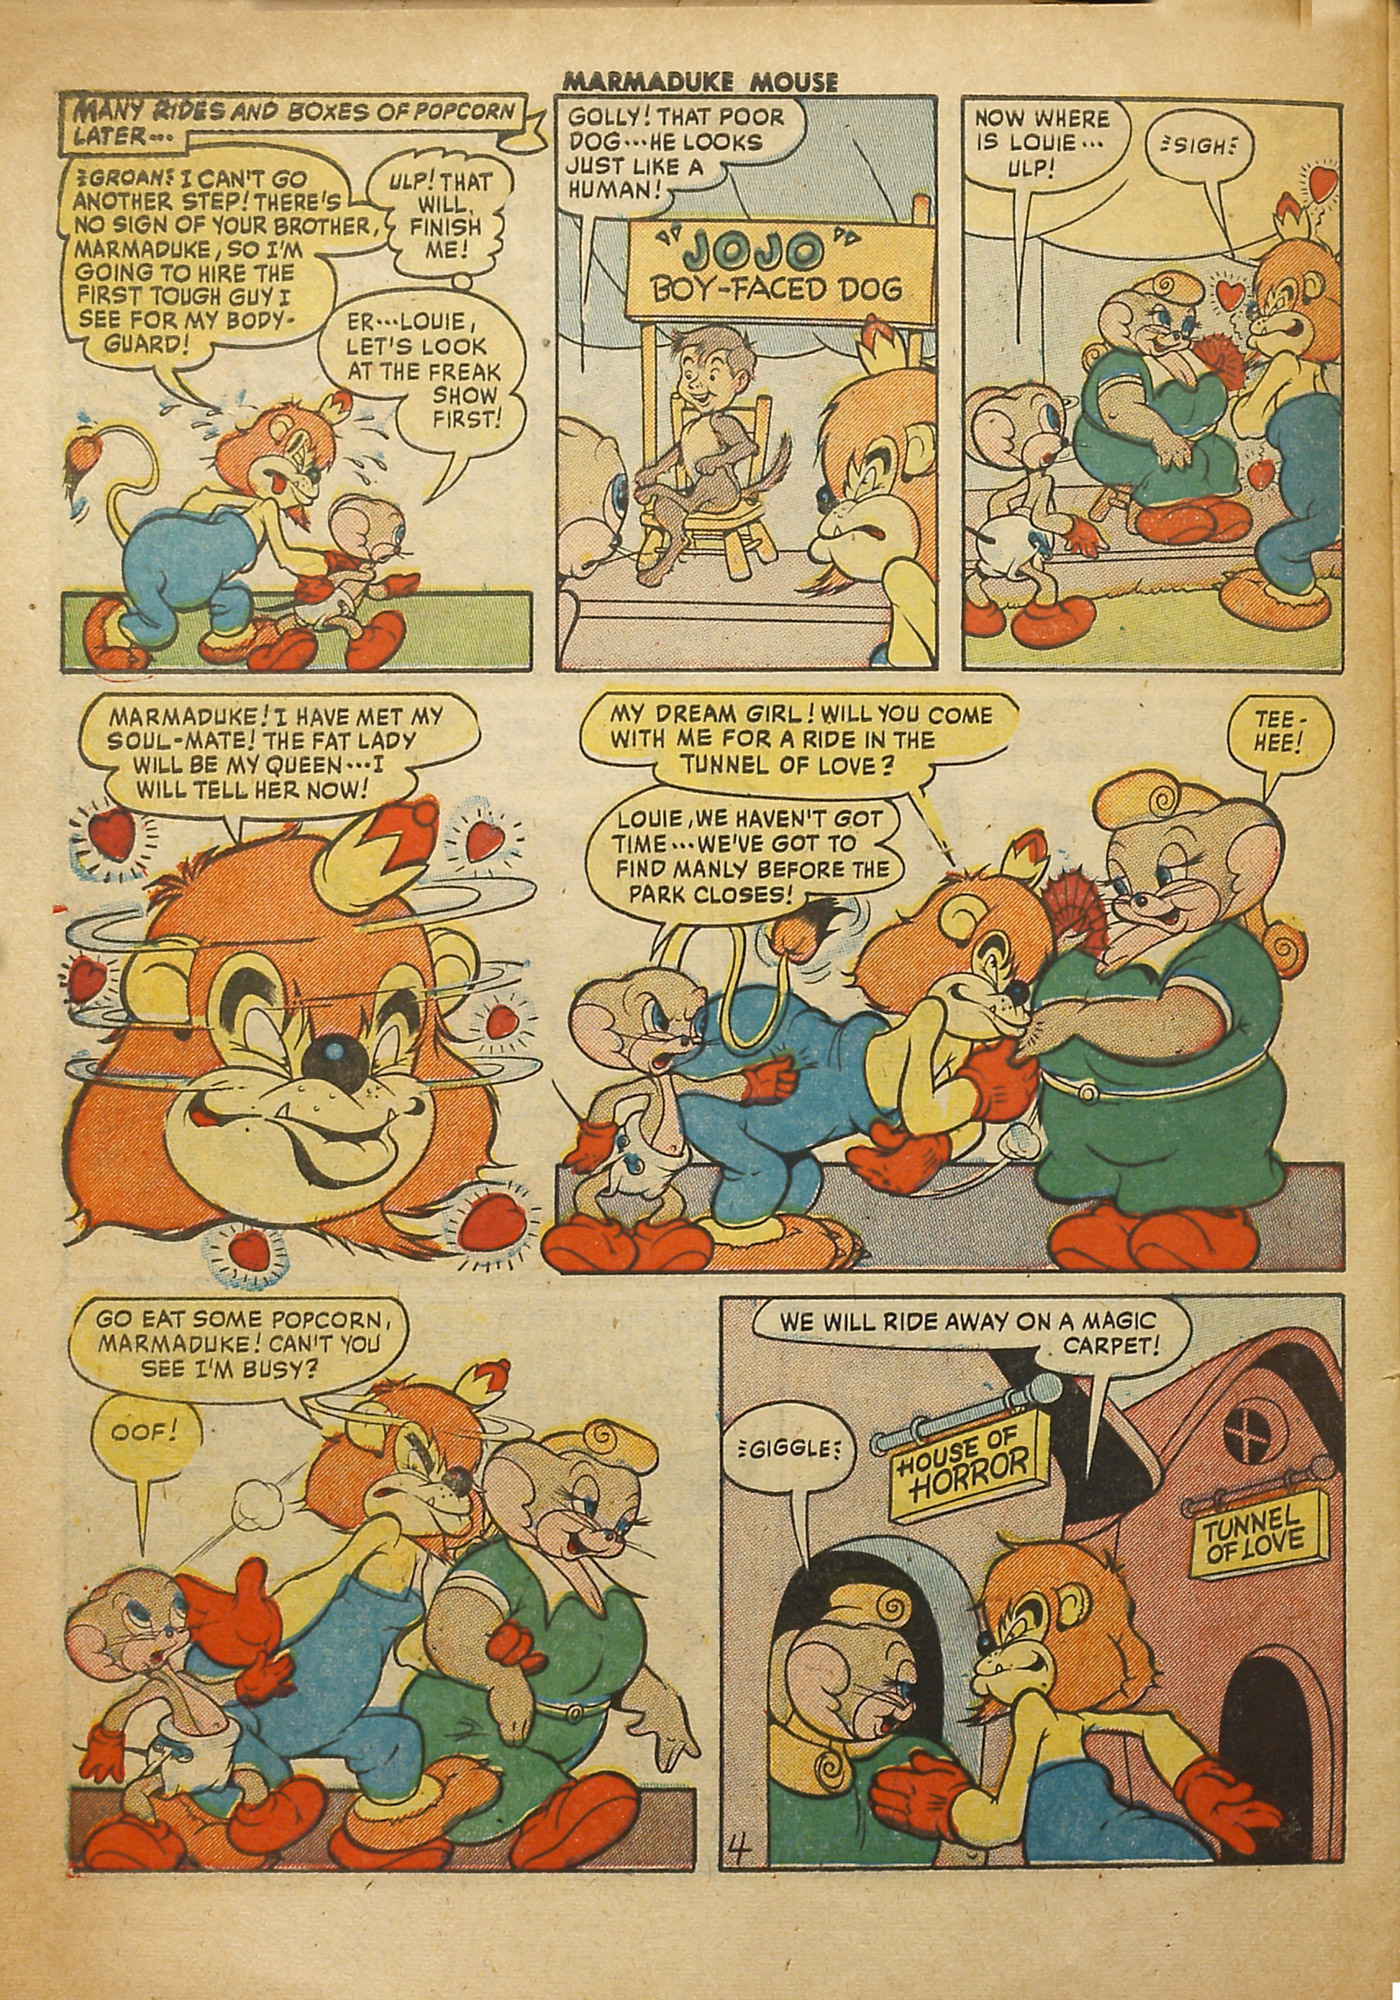 Read online Marmaduke Mouse comic -  Issue #30 - 30